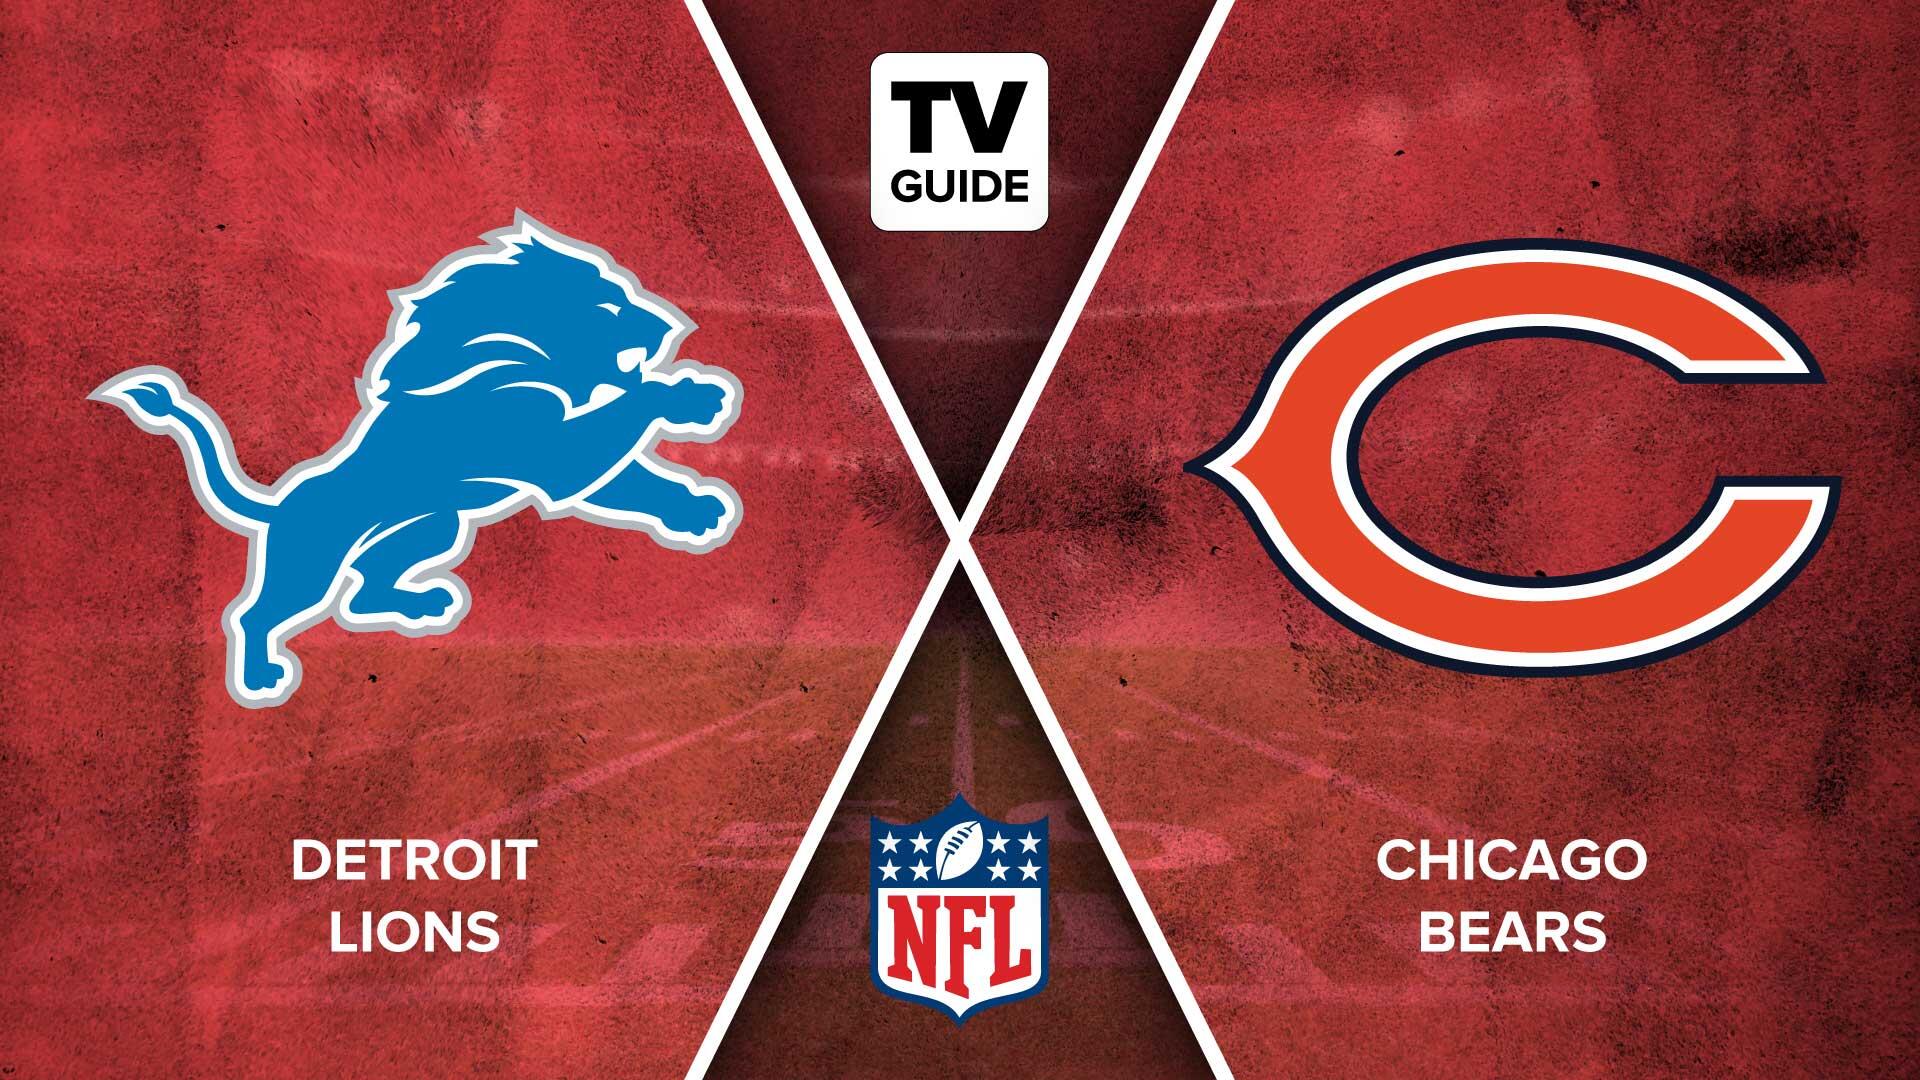 How to Watch Lions vs. Bears Live on 11/13 - TV Guide